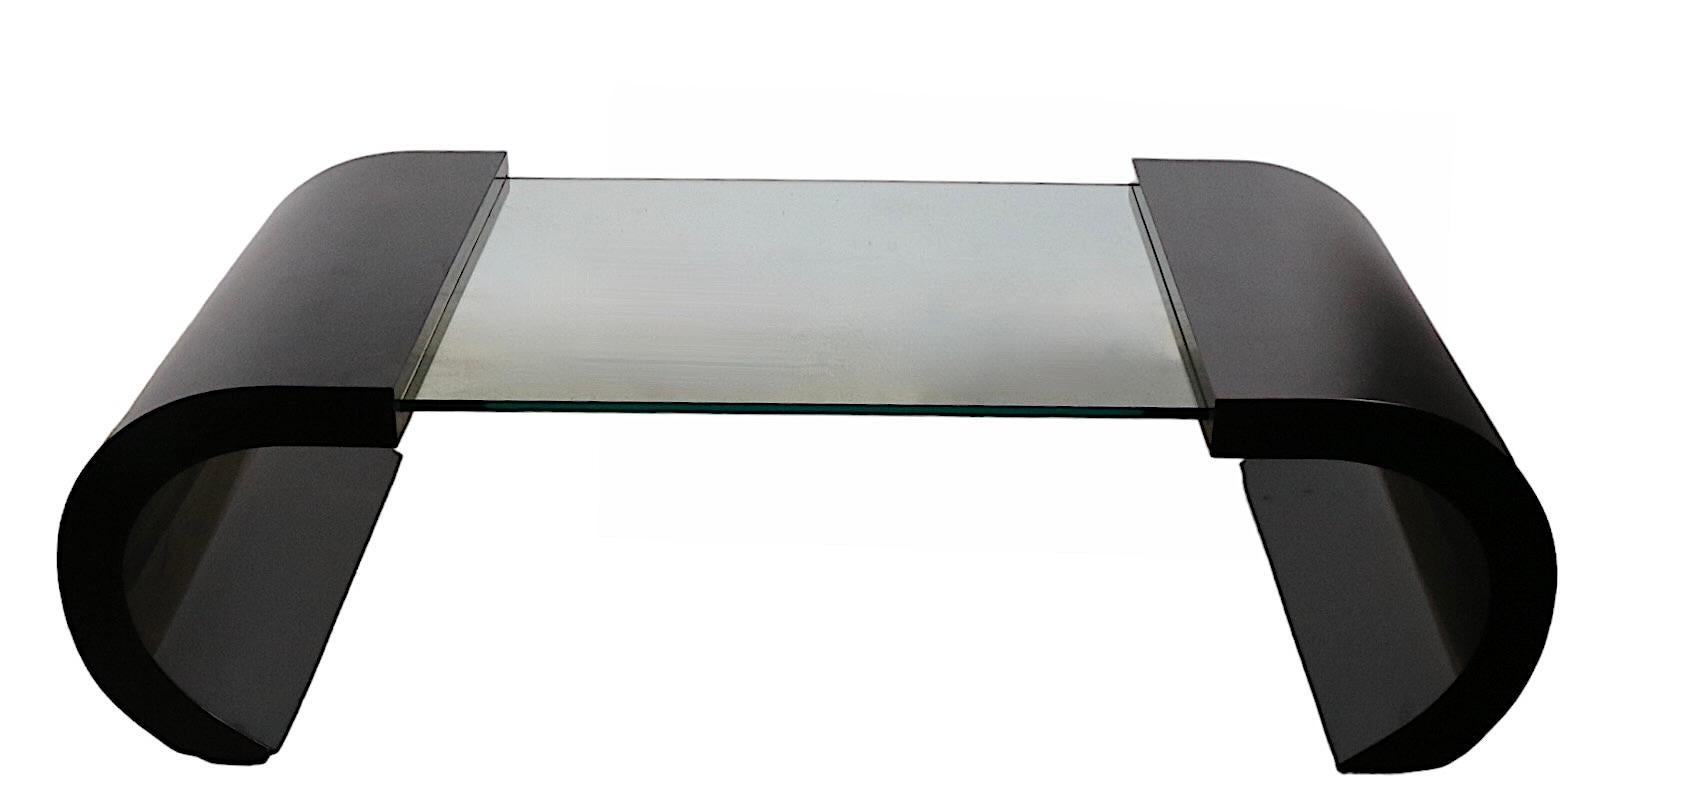 Post Modern Formica and Glass Coffee Table After Panton, C 1970's For Sale 7